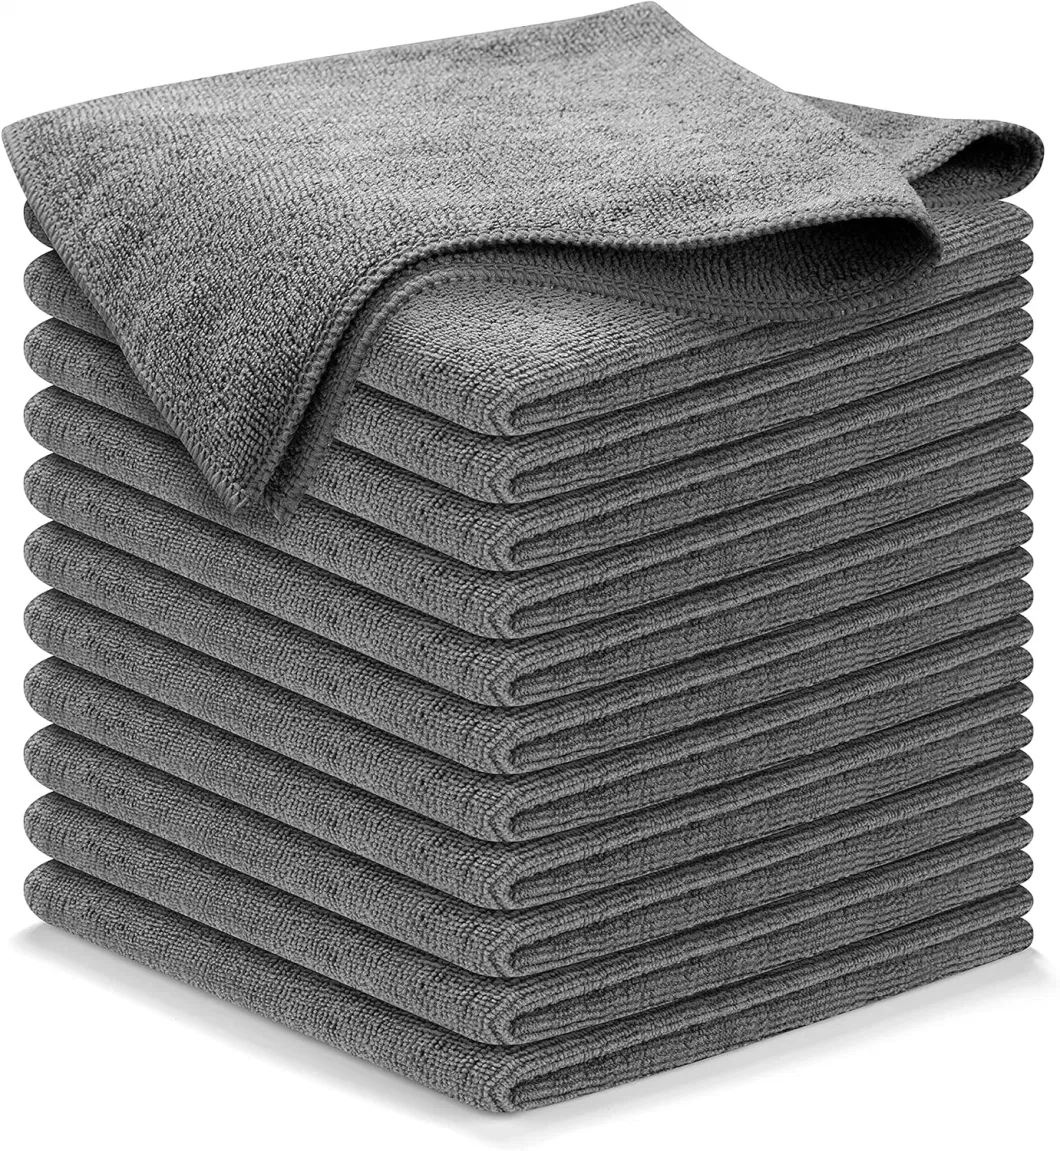 300GSM 40*40cm Grey Microfiber Cleaning Cloth for Kitchen Car Household Made of Microfibre Fabrics